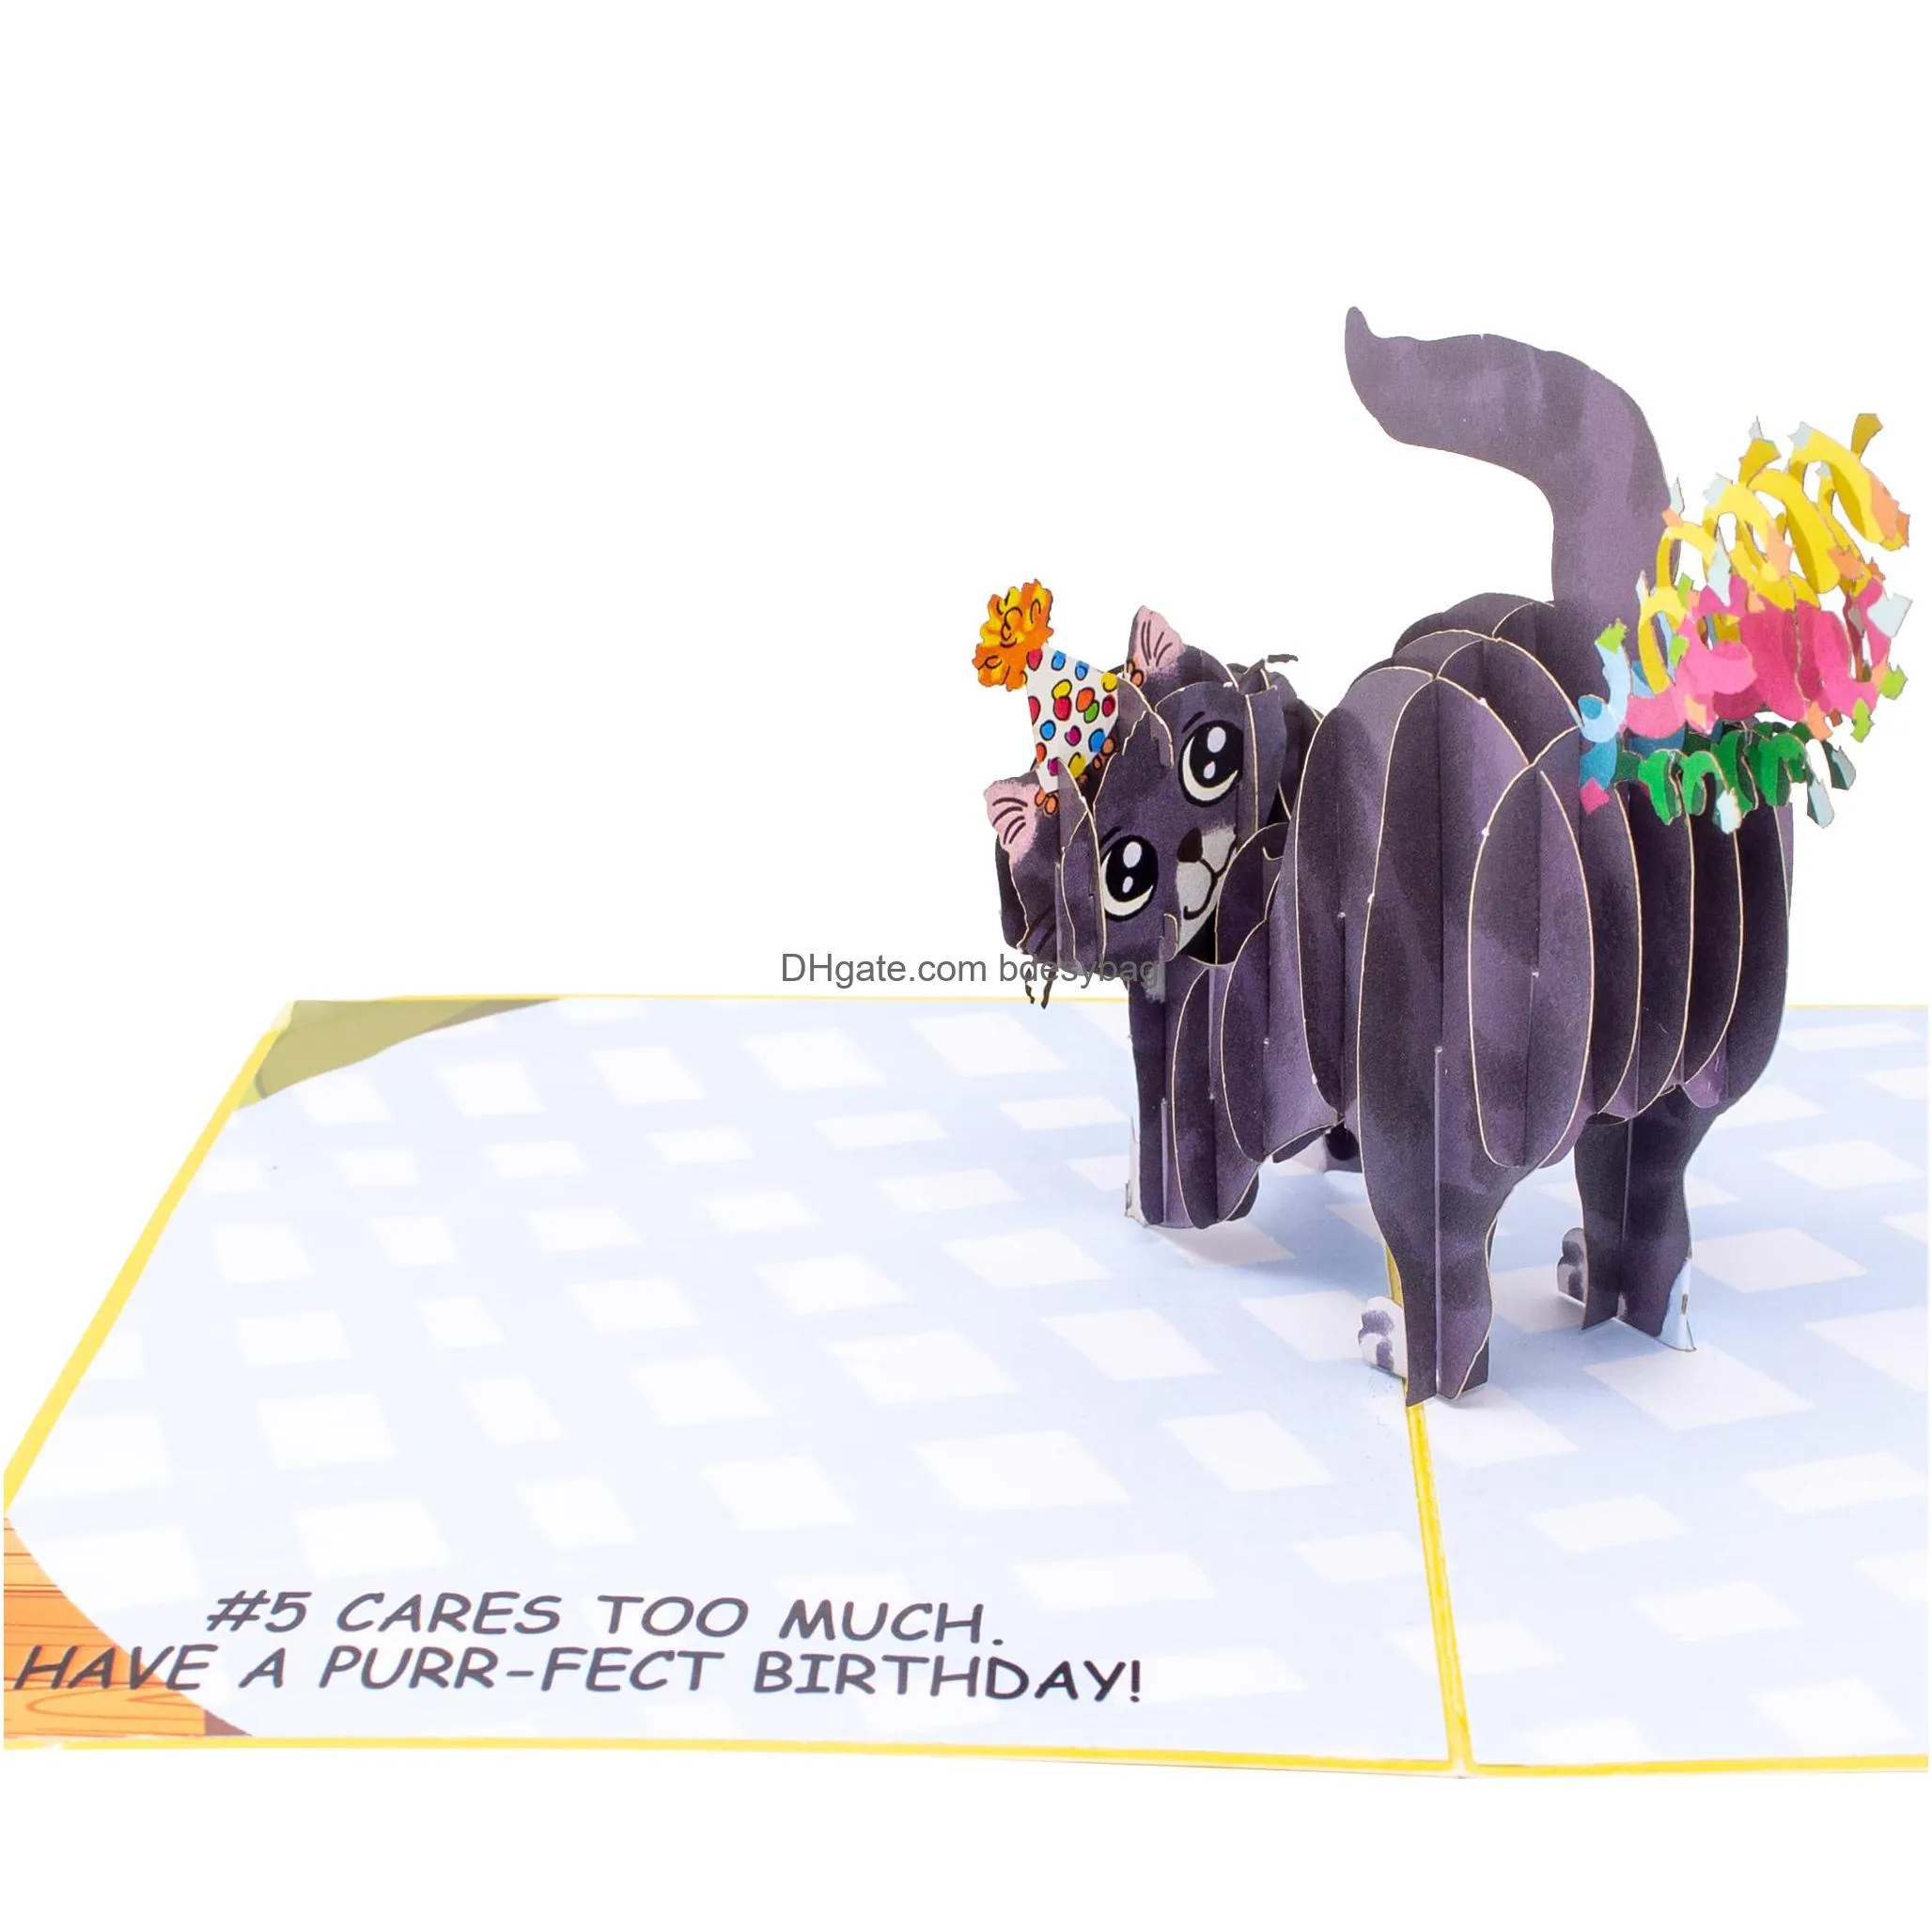 purrfect  up birthday card 3d cat farting confetti funny birthday card cat mom or dad bday popup cards for husband wife friend and every cat lover 1 card 5 x 7 inch 1 notepaper 1 envelope